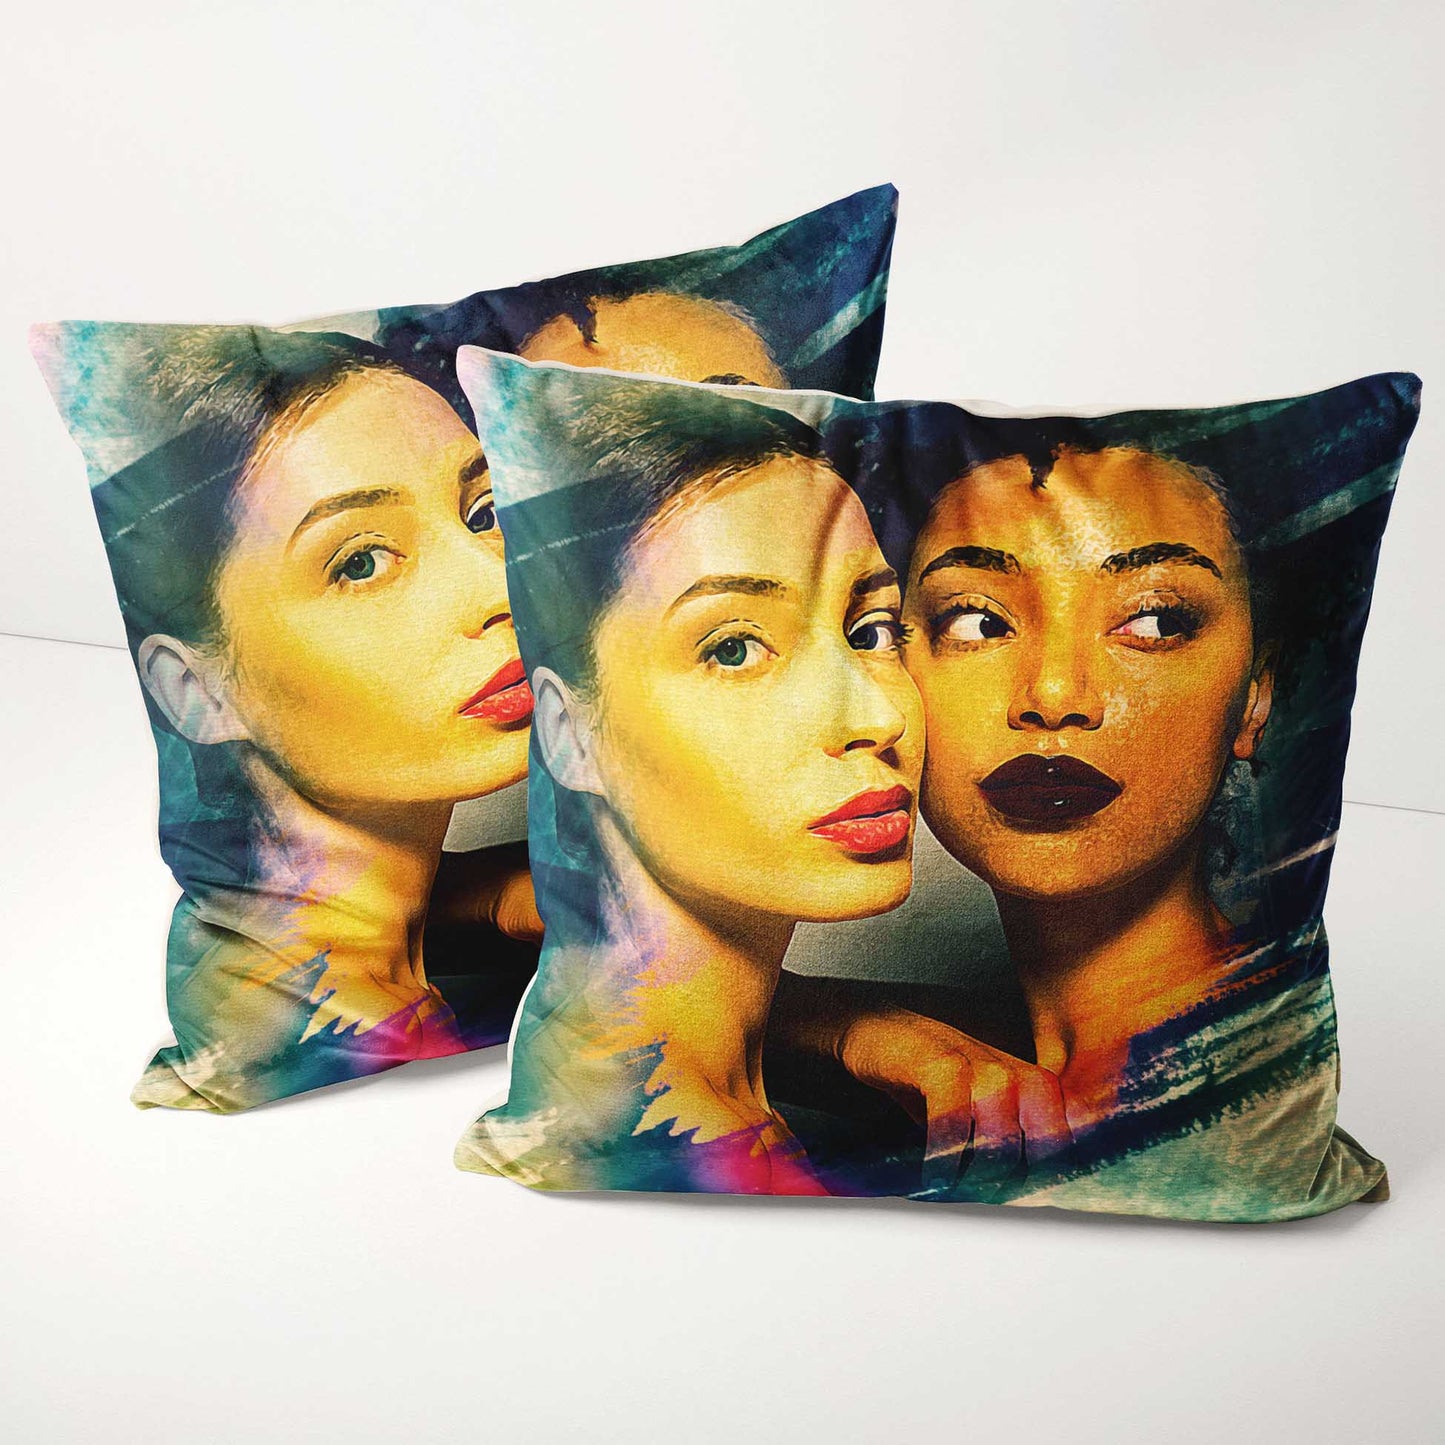 Personalise your space with the Artistic Brush Painting Cushion. Handmade with soft velvet fabric and printed with a design inspired by your photo, this unique cushion is a creative and original idea for interior decor